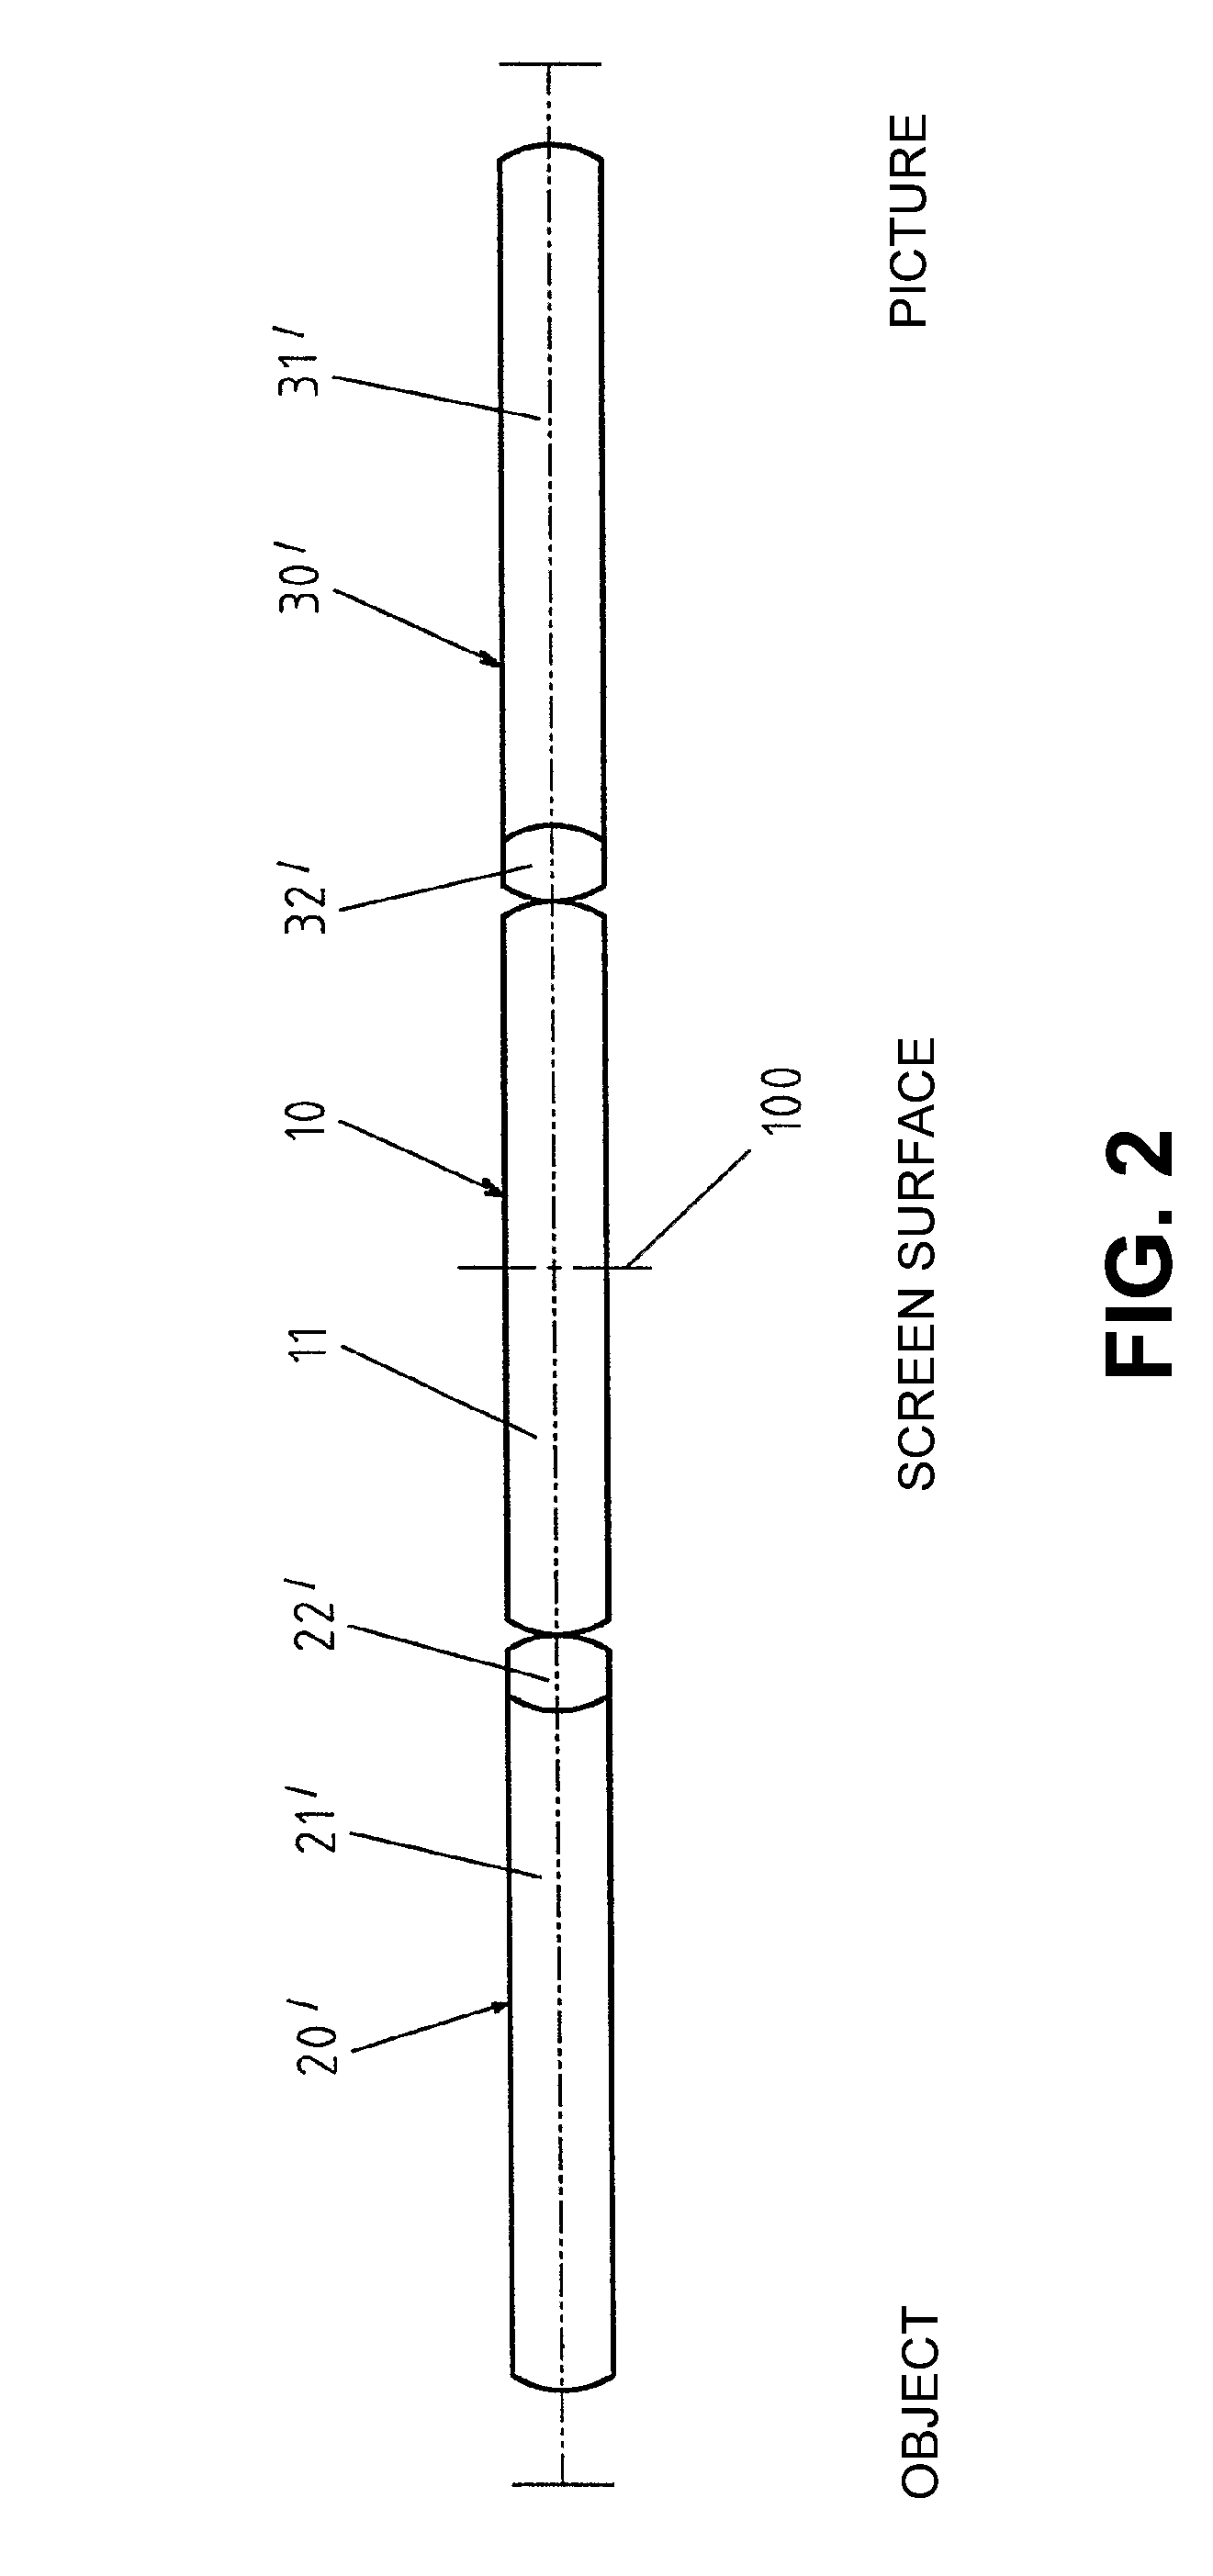 Image transmission system from three rod lenses for rigid endoscopes